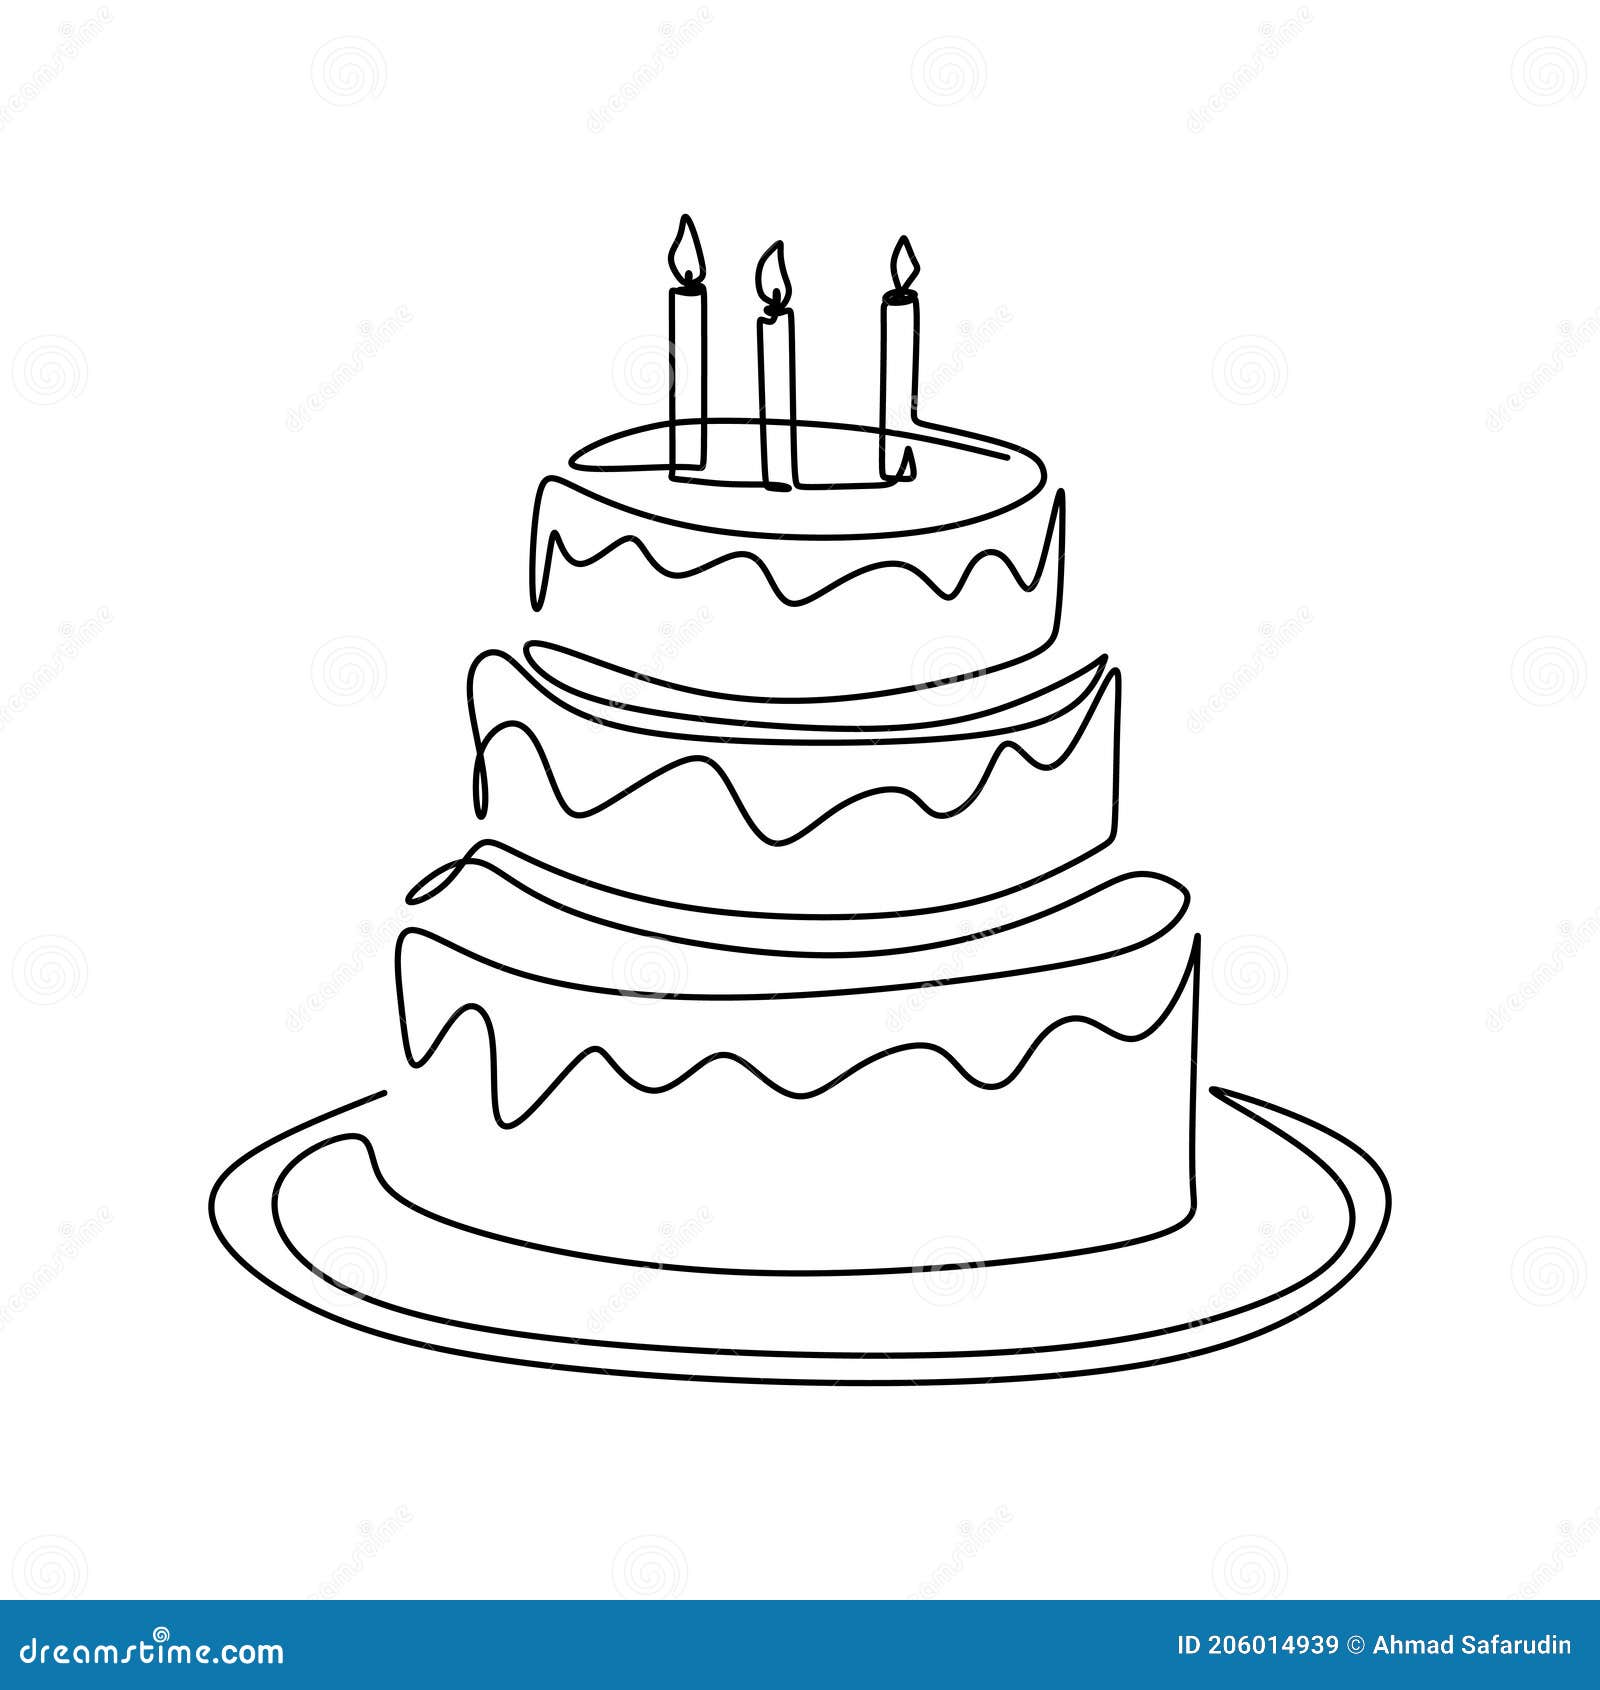 Continuous Line Drawing Of Birthday Cake With Candle A Cake With Cream And Candles Birthday Party Celebration Concept Happy Stock Vector Illustration Of Black Event